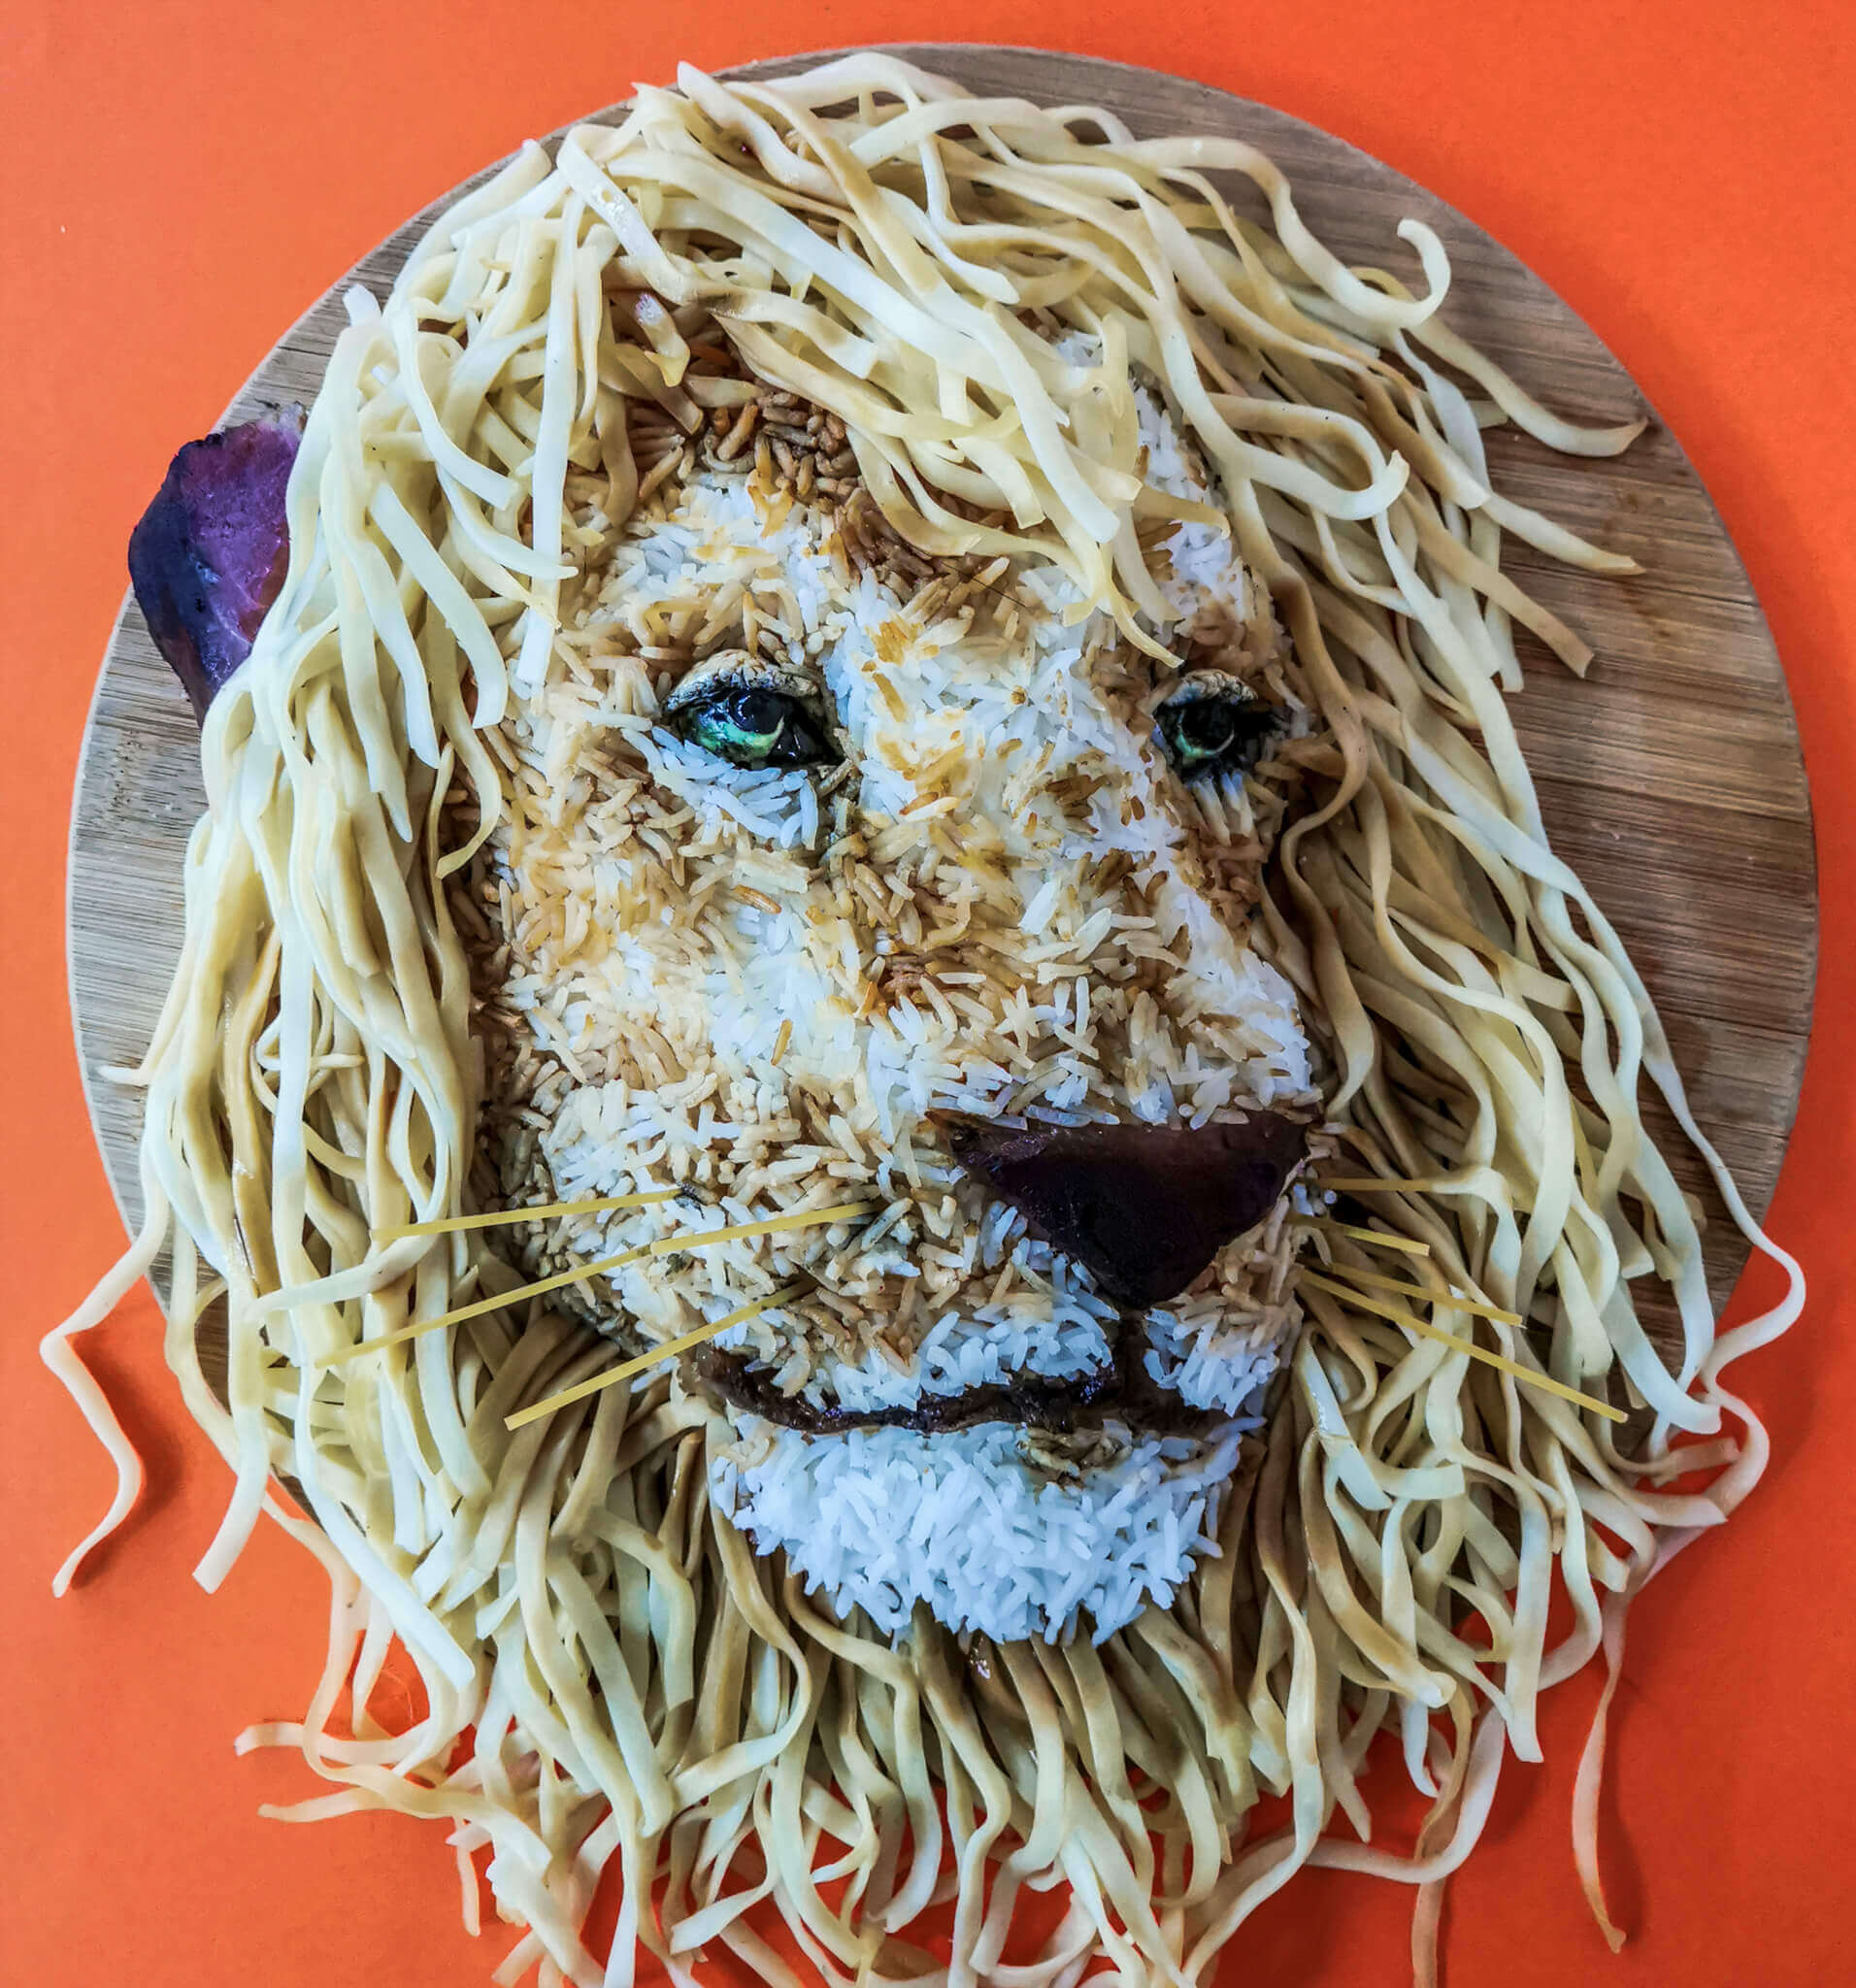 A beautiful plate - an artfully created lion head out of food 